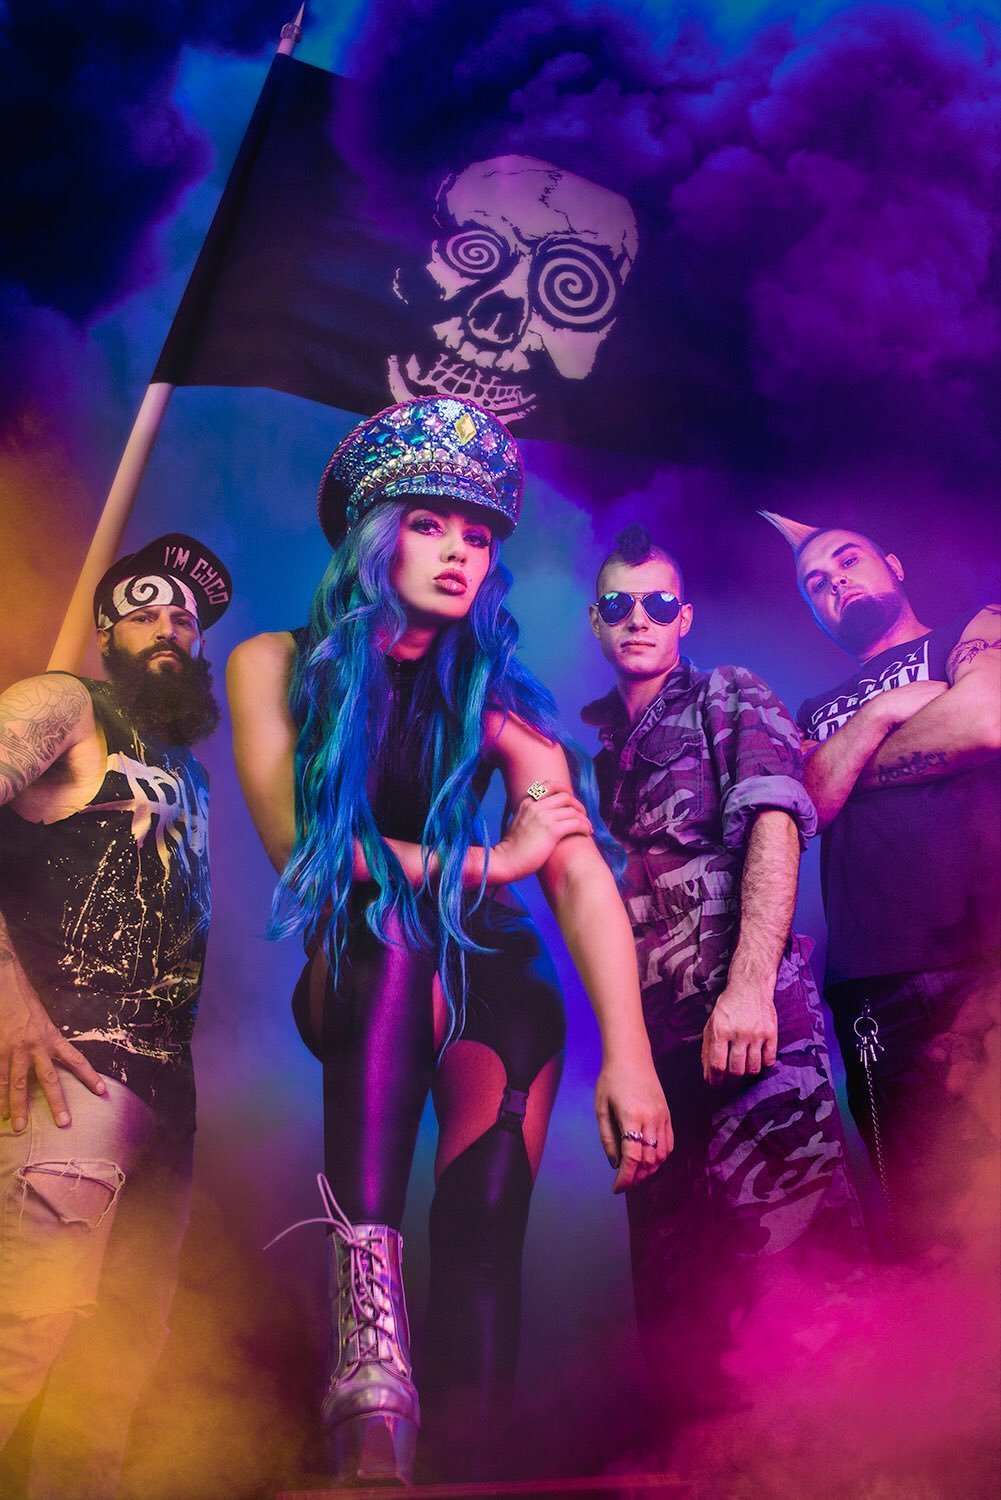 SUMO CYCO RELEASES "CYCLONE" OFFICIAL MUSIC VIDEO